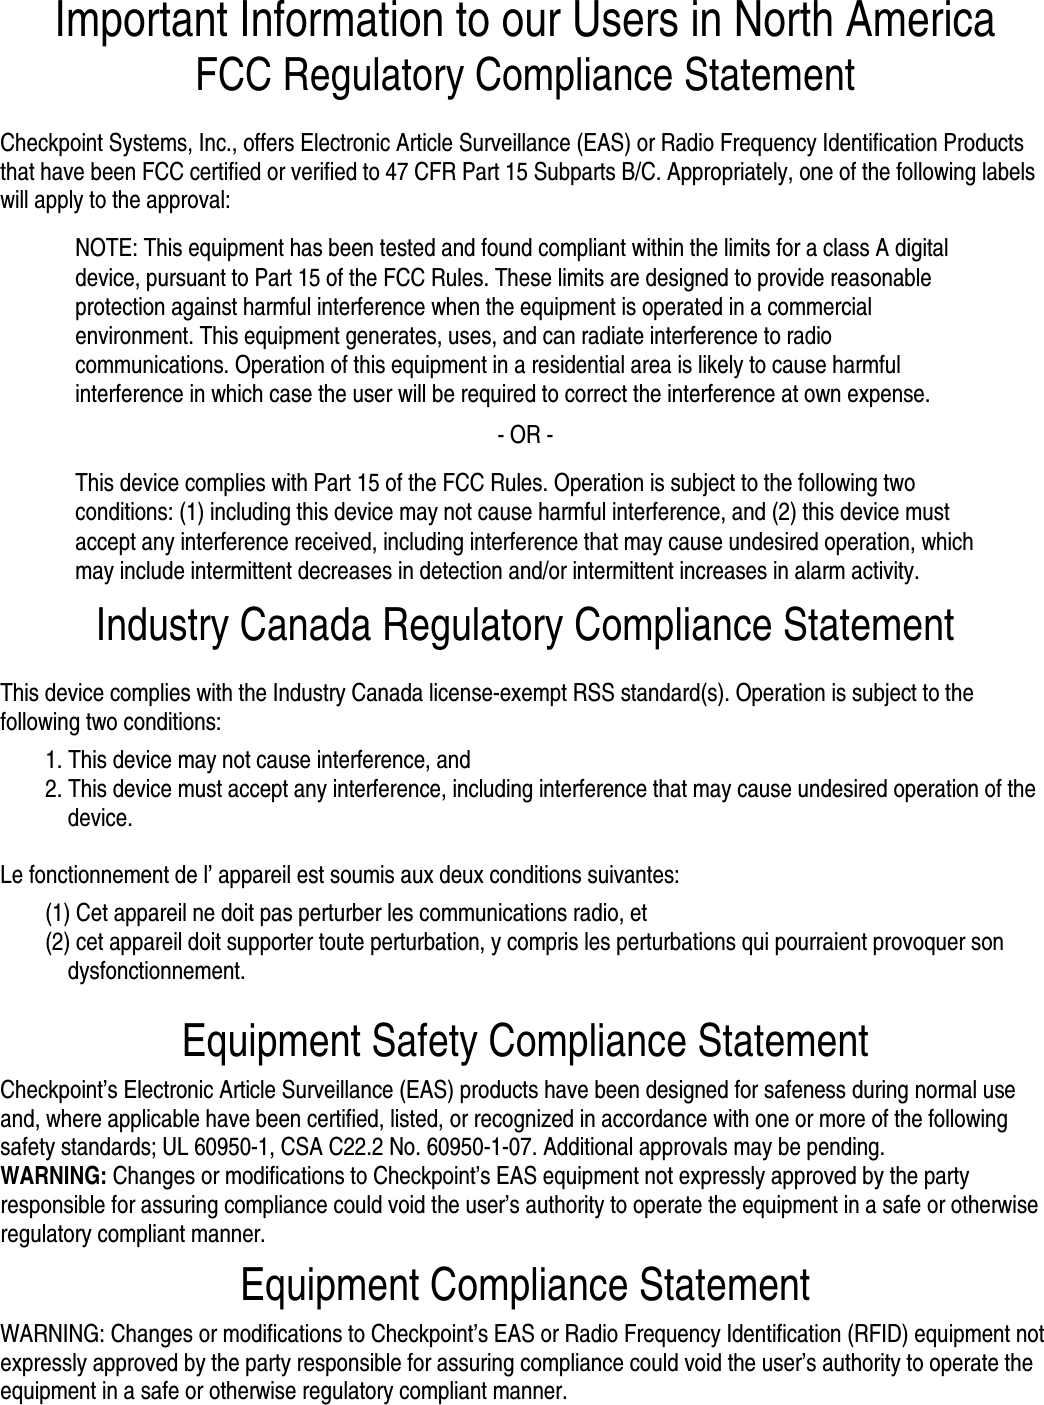 Important Information to our Users in North America FCC Regulatory Compliance Statement  Checkpoint Systems, Inc., offers Electronic Article Surveillance (EAS) or Radio Frequency Identification Products that have been FCC certified or verified to 47 CFR Part 15 Subparts B/C. Appropriately, one of the following labels will apply to the approval: NOTE: This equipment has been tested and found compliant within the limits for a class A digital device, pursuant to Part 15 of the FCC Rules. These limits are designed to provide reasonable protection against harmful interference when the equipment is operated in a commercial environment. This equipment generates, uses, and can radiate interference to radio communications. Operation of this equipment in a residential area is likely to cause harmful interference in which case the user will be required to correct the interference at own expense. - OR - This device complies with Part 15 of the FCC Rules. Operation is subject to the following two conditions: (1) including this device may not cause harmful interference, and (2) this device must accept any interference received, including interference that may cause undesired operation, which may include intermittent decreases in detection and/or intermittent increases in alarm activity. Industry Canada Regulatory Compliance Statement  This device complies with the Industry Canada license-exempt RSS standard(s). Operation is subject to the following two conditions:  1. This device may not cause interference, and   2. This device must accept any interference, including interference that may cause undesired operation of the device.  Le fonctionnement de l’ appareil est soumis aux deux conditions suivantes:   (1) Cet appareil ne doit pas perturber les communications radio, et  (2) cet appareil doit supporter toute perturbation, y compris les perturbations qui pourraient provoquer son dysfonctionnement.  Equipment Safety Compliance Statement  Checkpoint’s Electronic Article Surveillance (EAS) products have been designed for safeness during normal use and, where applicable have been certified, listed, or recognized in accordance with one or more of the following safety standards; UL 60950-1, CSA C22.2 No. 60950-1-07. Additional approvals may be pending.  WARNING: Changes or modifications to Checkpoint’s EAS equipment not expressly approved by the party responsible for assuring compliance could void the user’s authority to operate the equipment in a safe or otherwise regulatory compliant manner.  Equipment Compliance Statement  WARNING: Changes or modifications to Checkpoint’s EAS or Radio Frequency Identification (RFID) equipment not expressly approved by the party responsible for assuring compliance could void the user’s authority to operate the equipment in a safe or otherwise regulatory compliant manner.